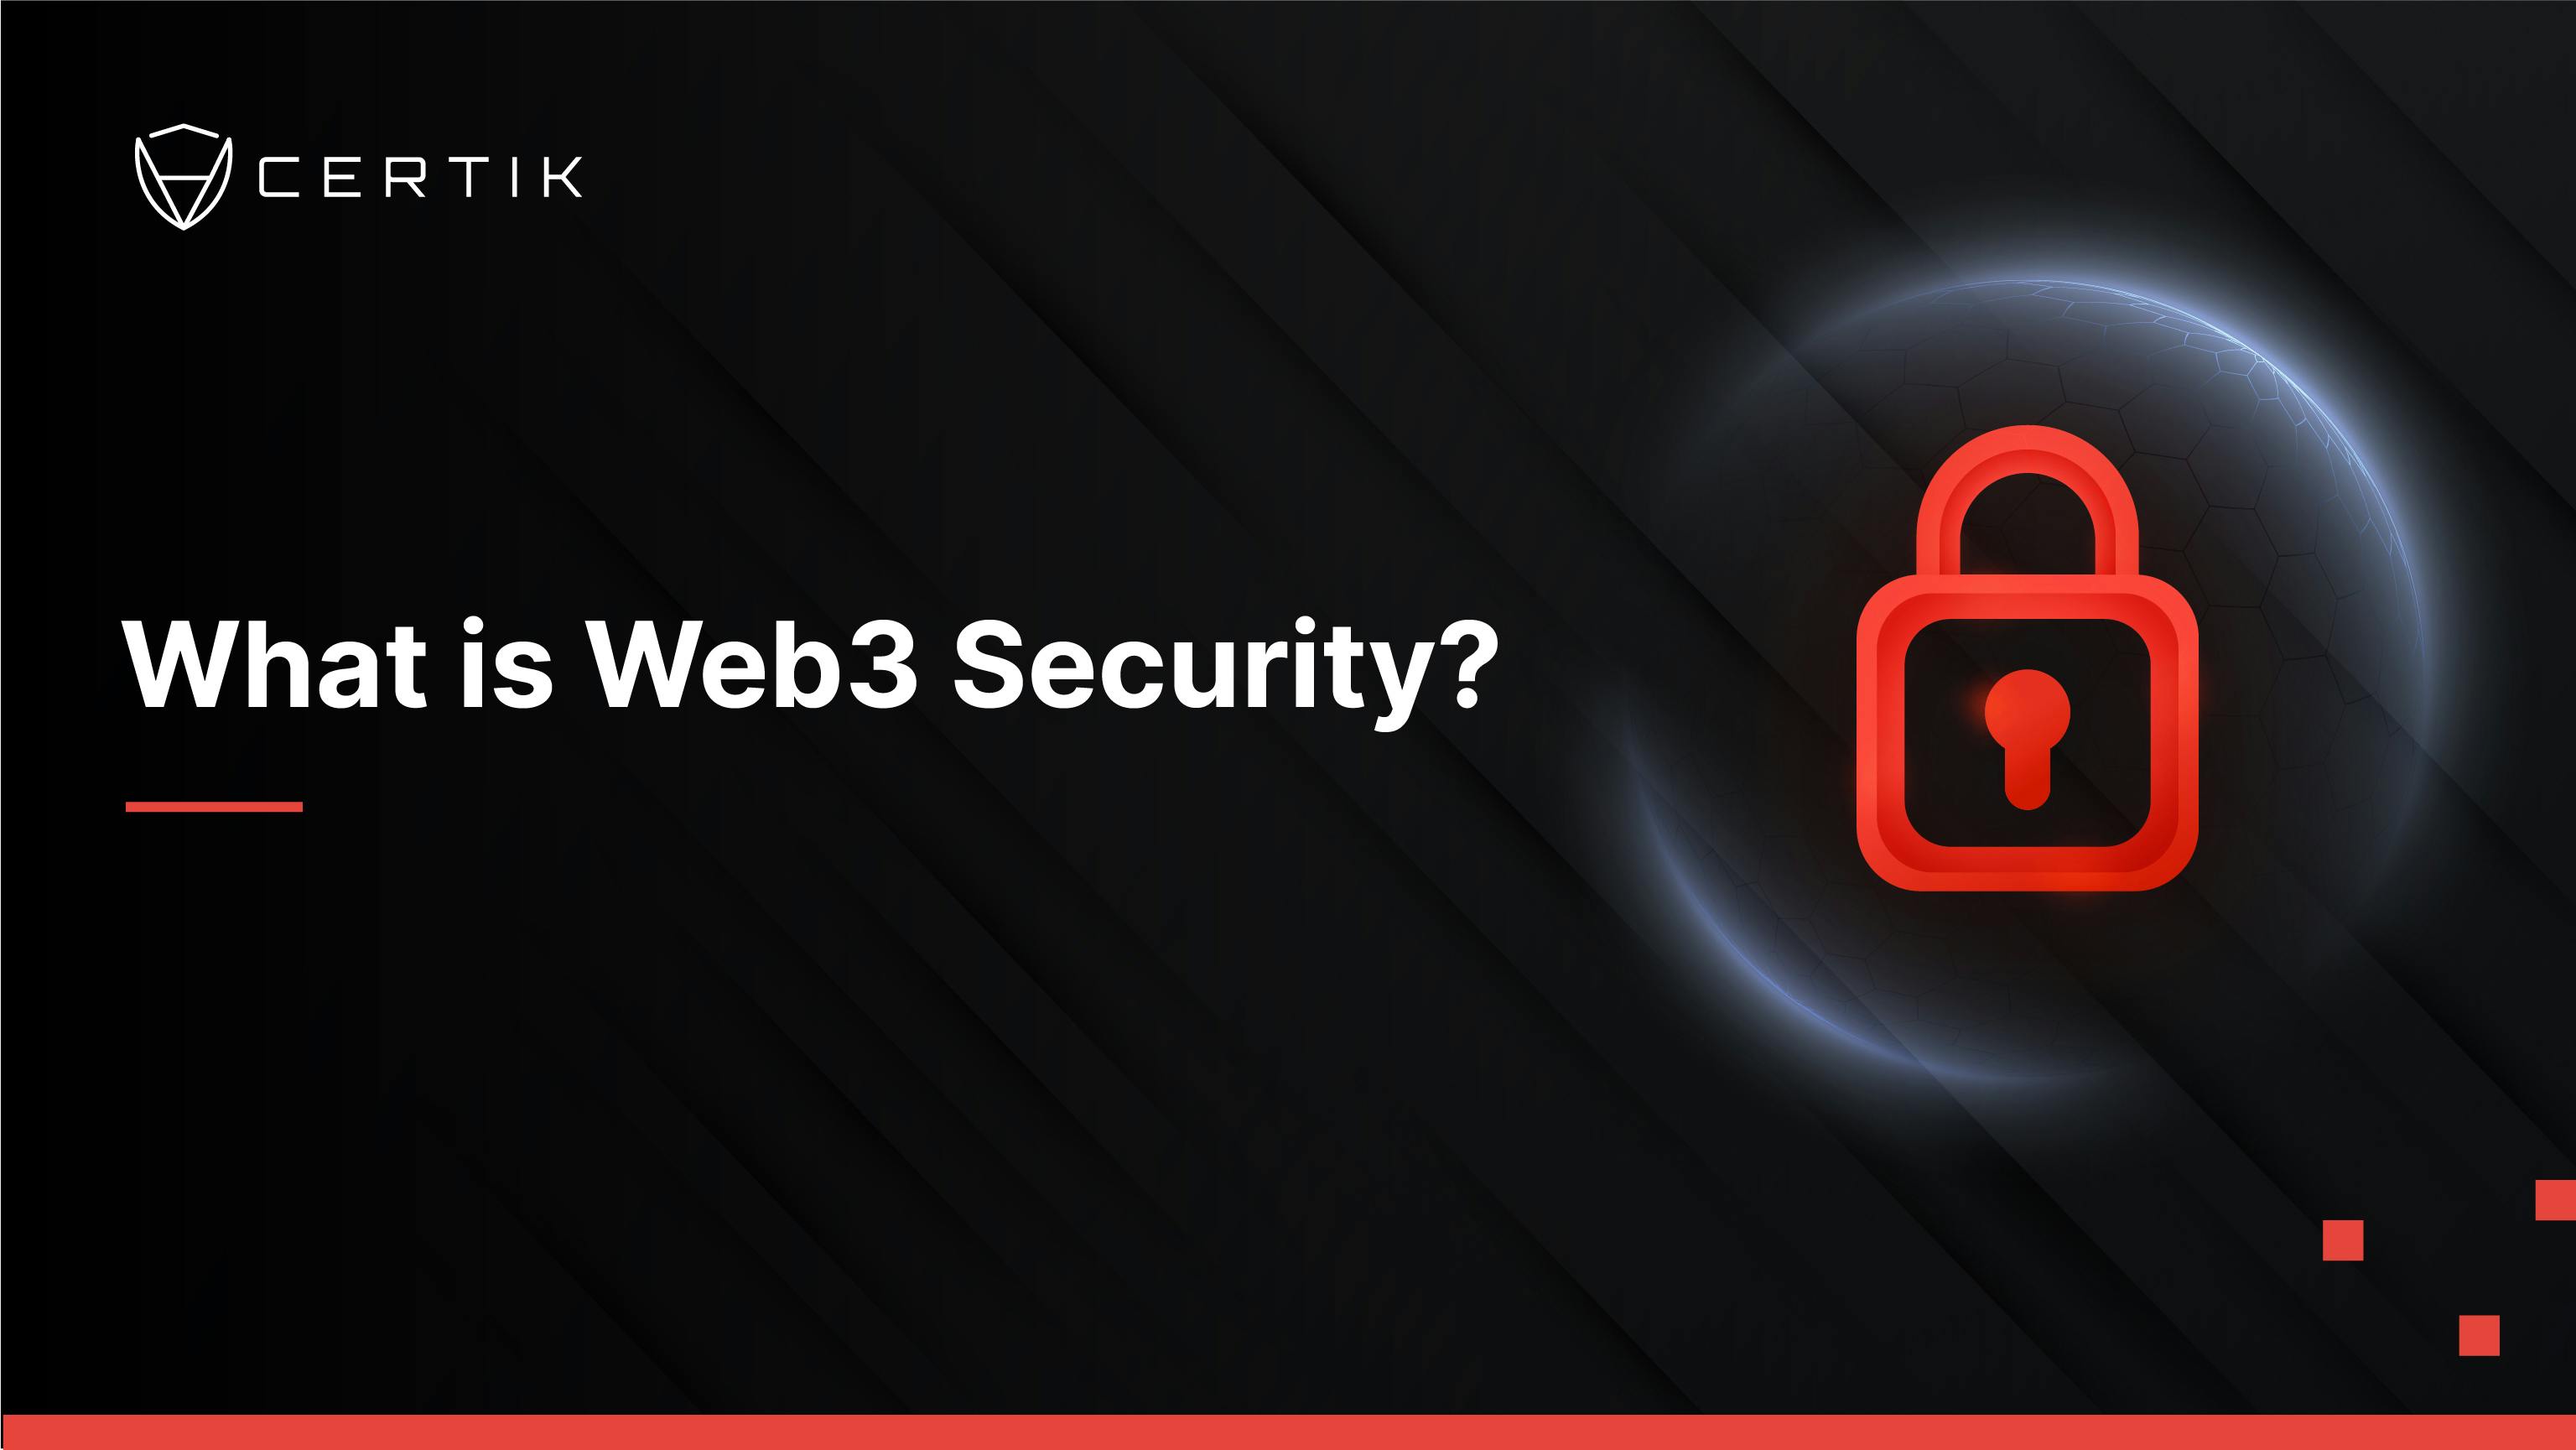 What is Web3 Security?